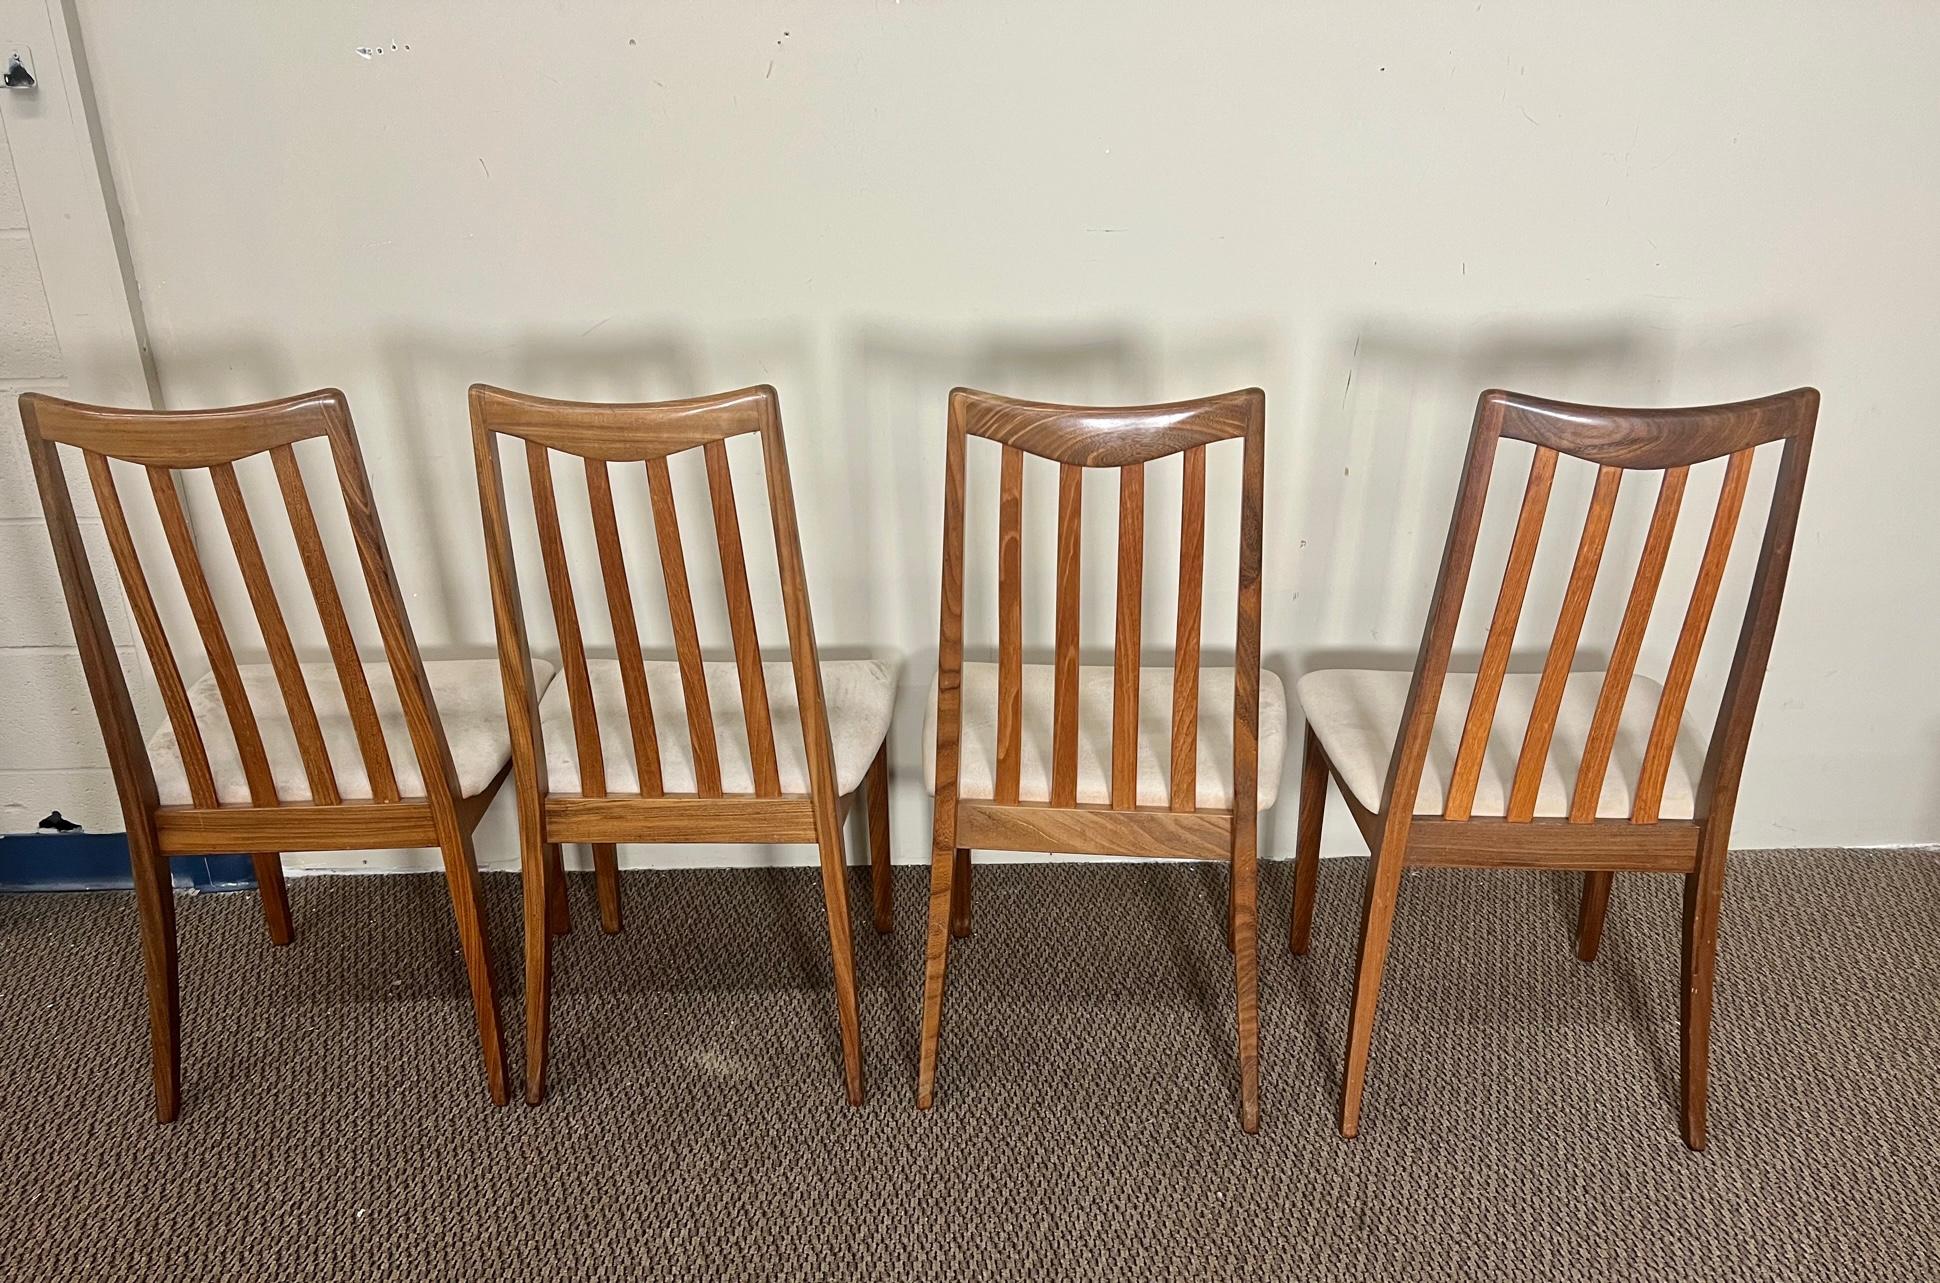 Set of 8 mid century teak chairs by G Plan.

Very good vintage condition. Some minor marks on the frames. Six chairs with the same upholstery. Two chairs with slightly different upholstery.

Dimensions: W x D x H

19